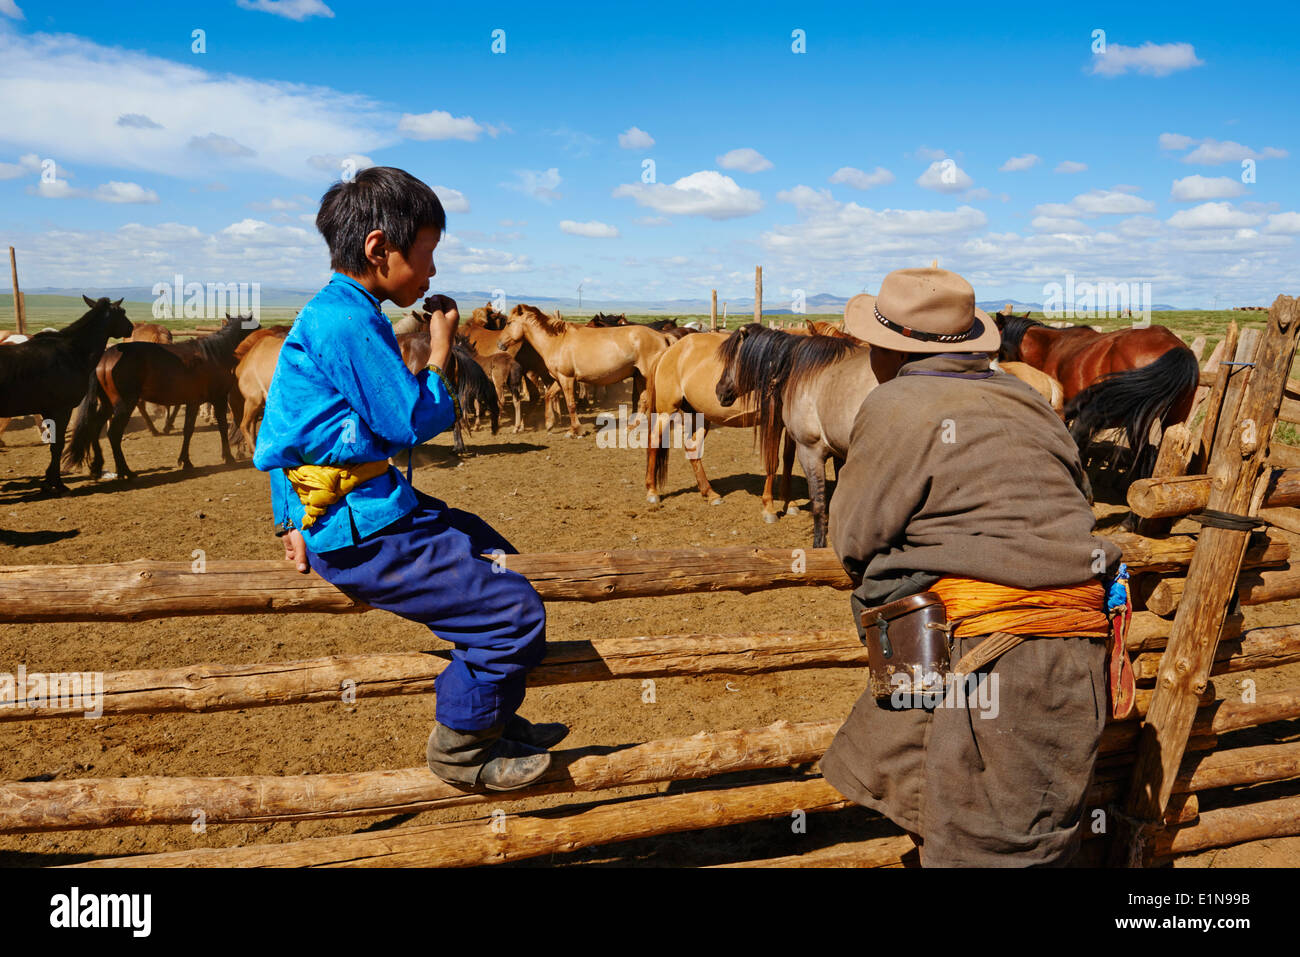 Mongolia, Tov province, Nomad camp, Rallying of horses drove Stock Photo